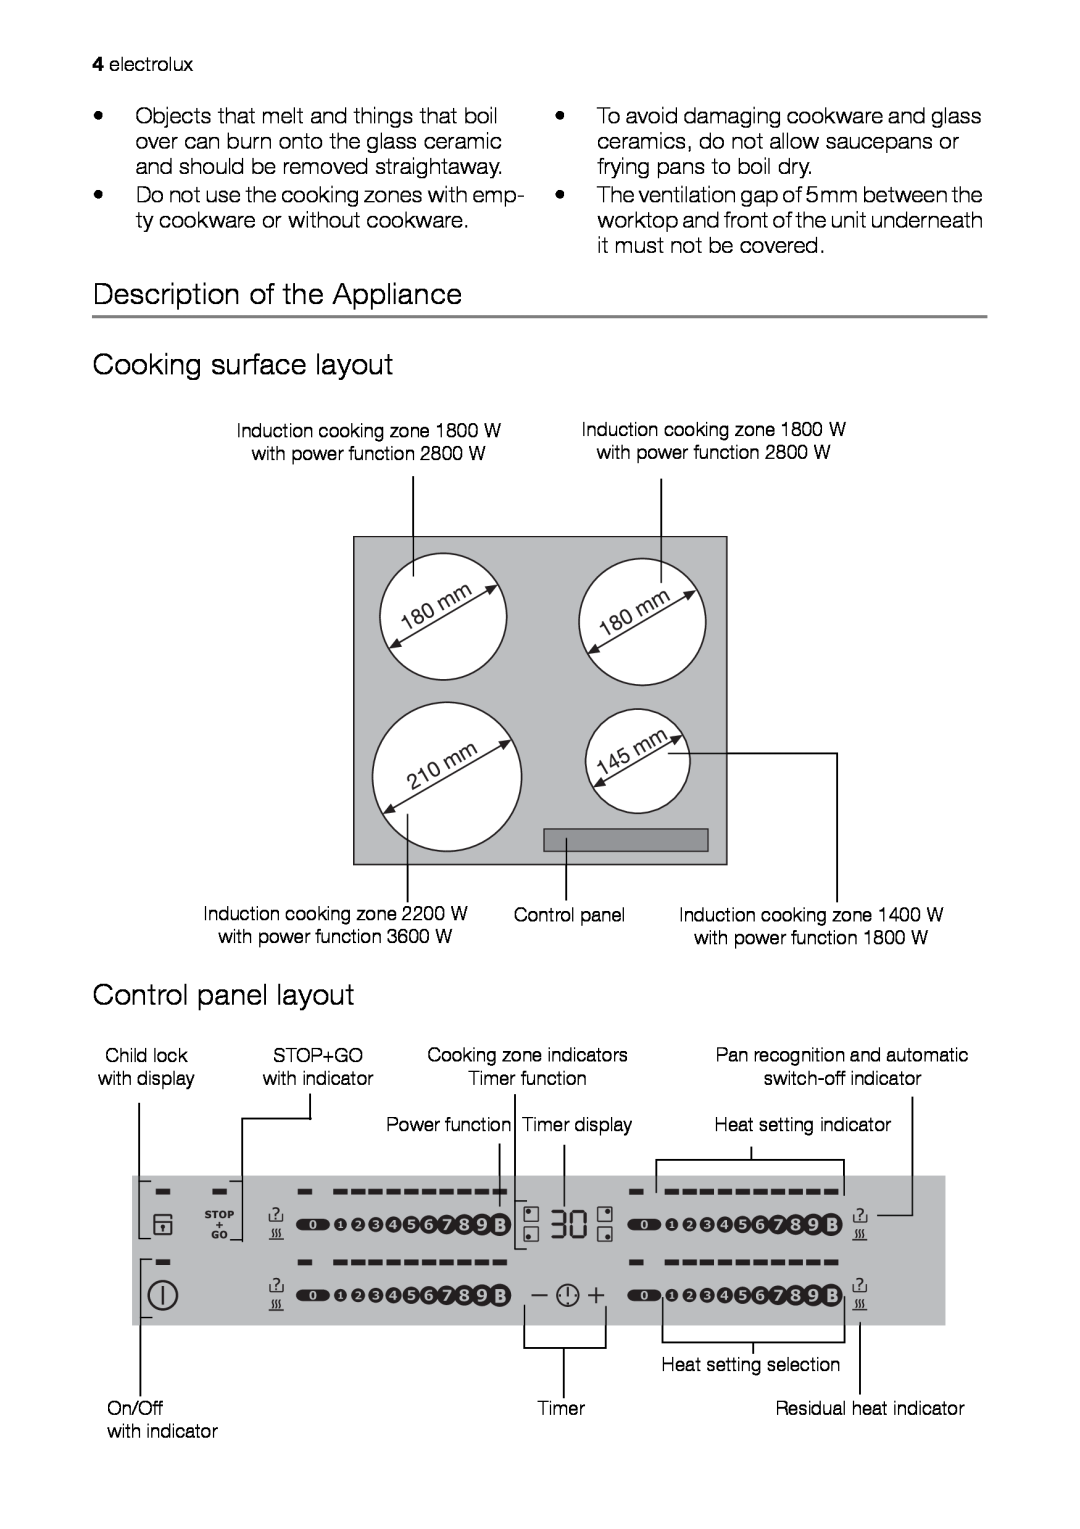 Electrolux EHD 60150 IAU user manual Description of the Appliance Cooking surface layout, Control panel layout 